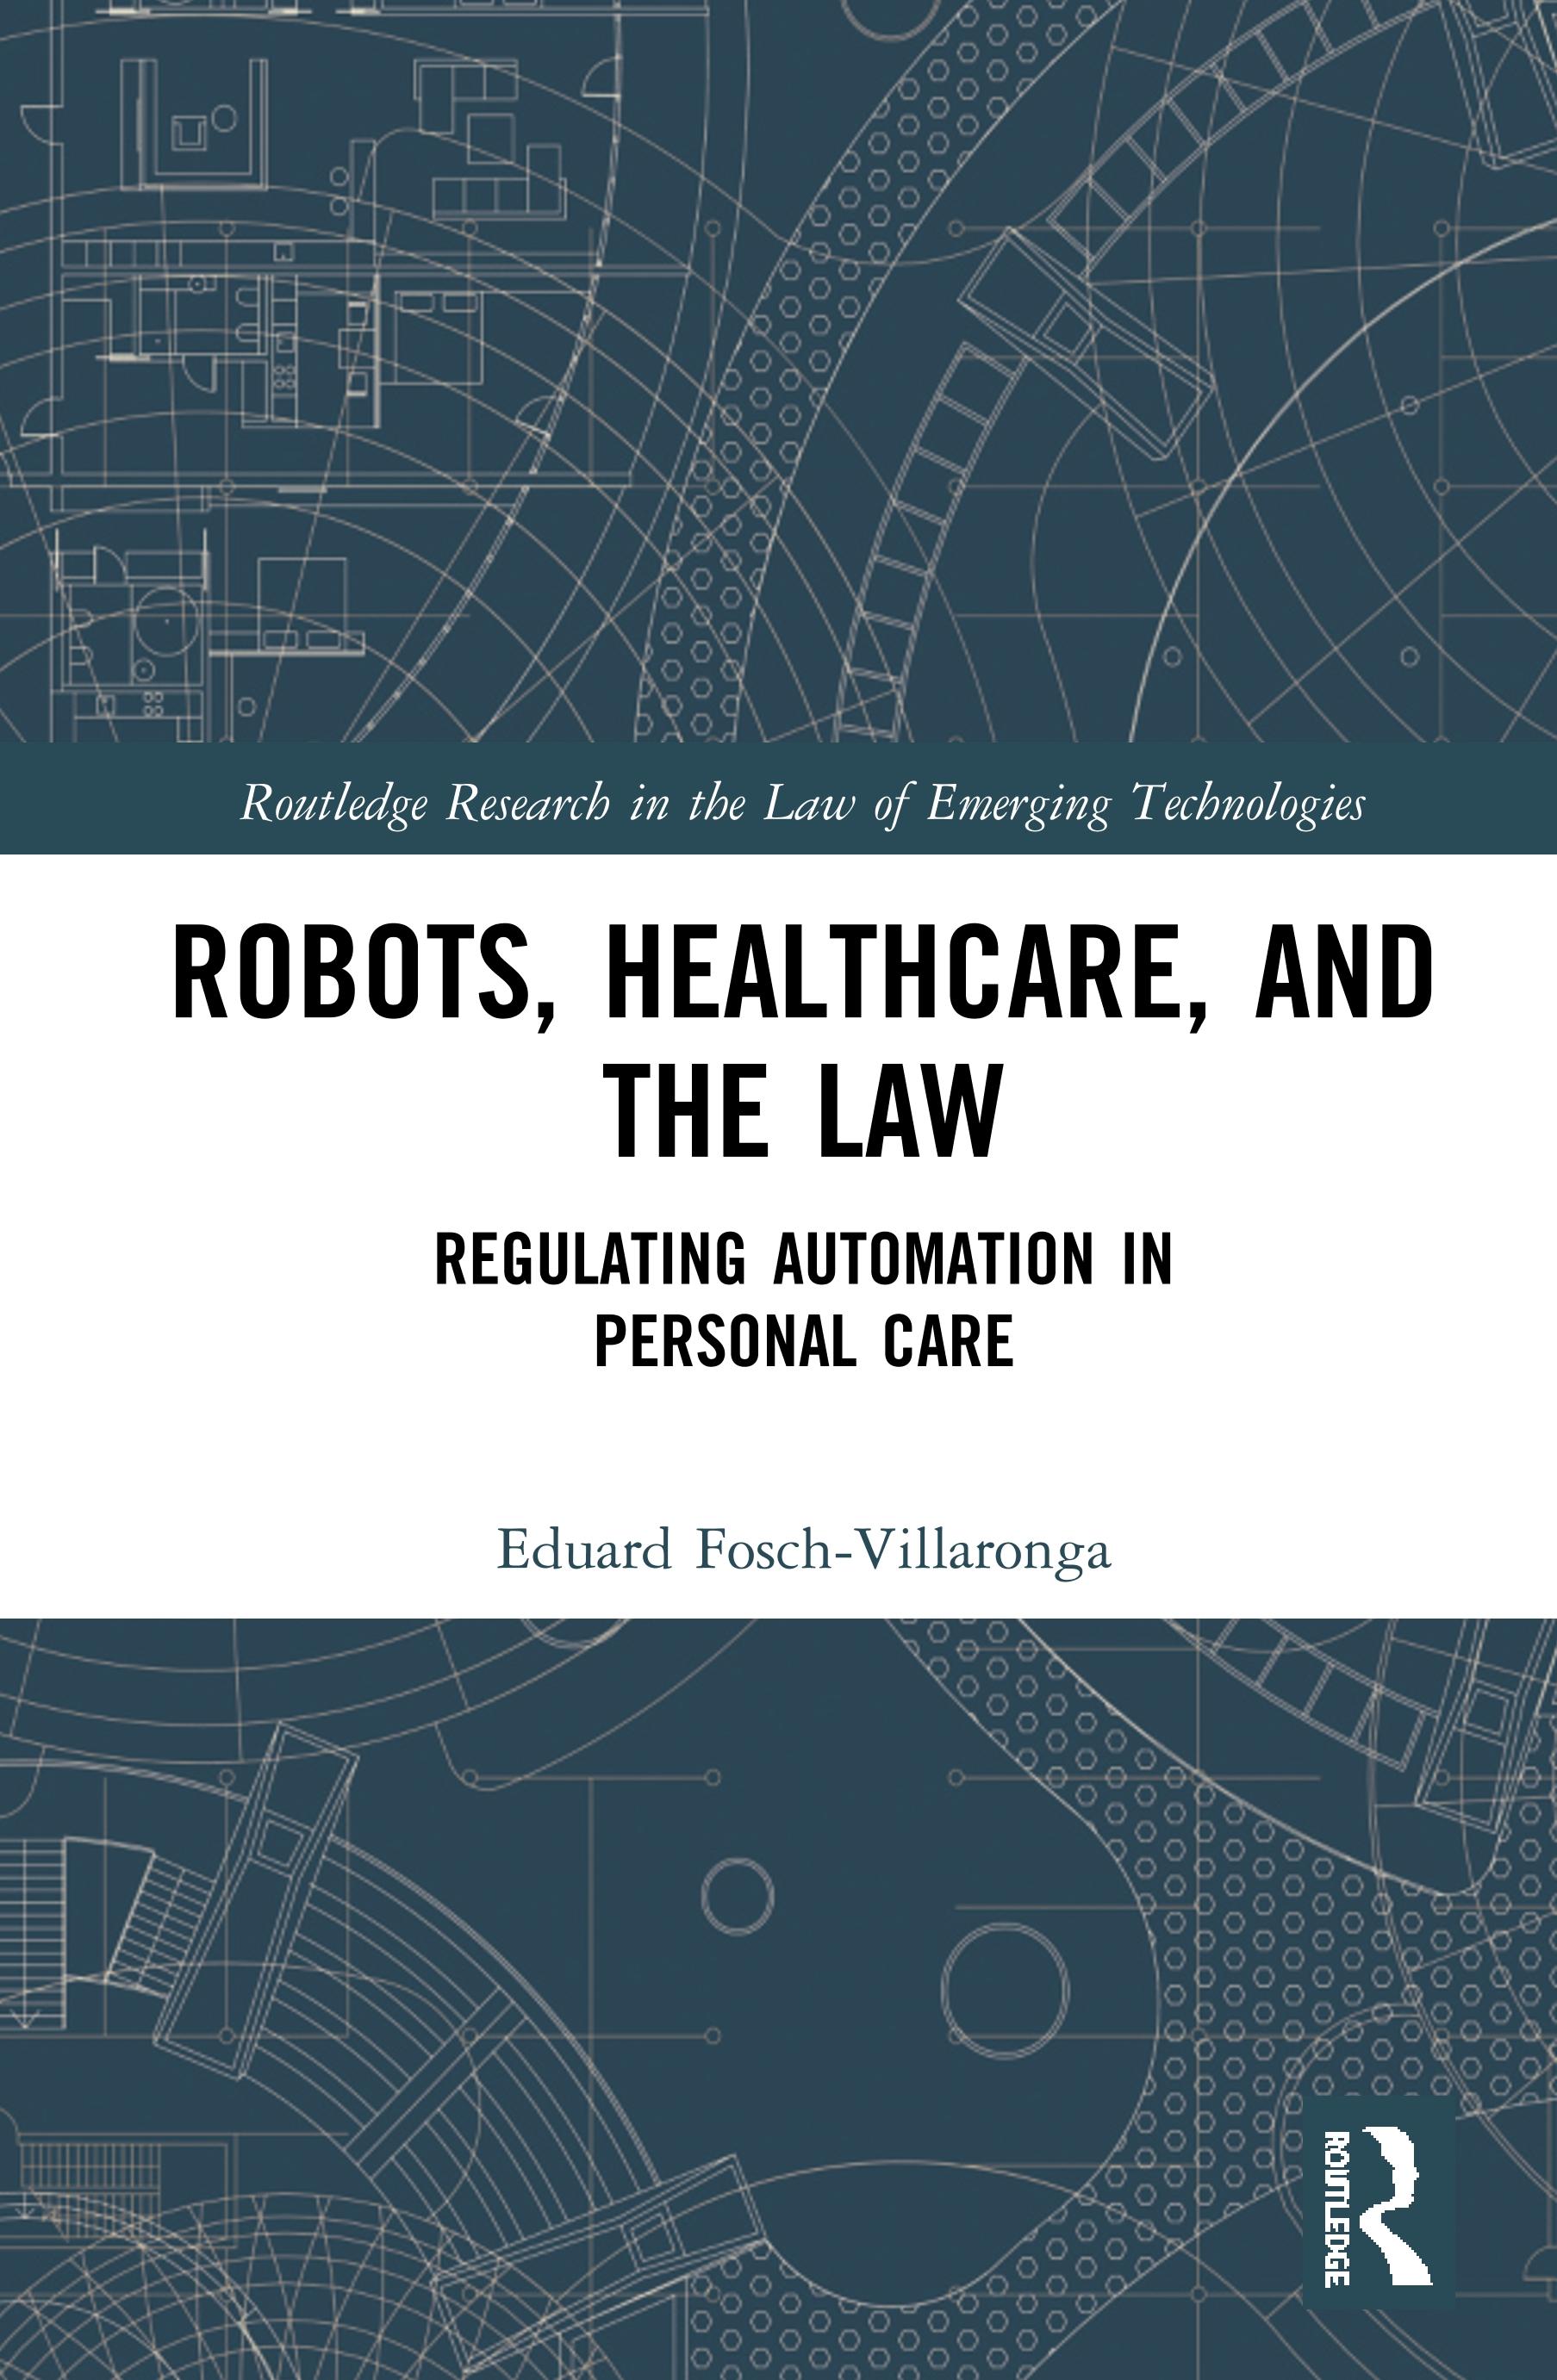 healthcare, robots and the law